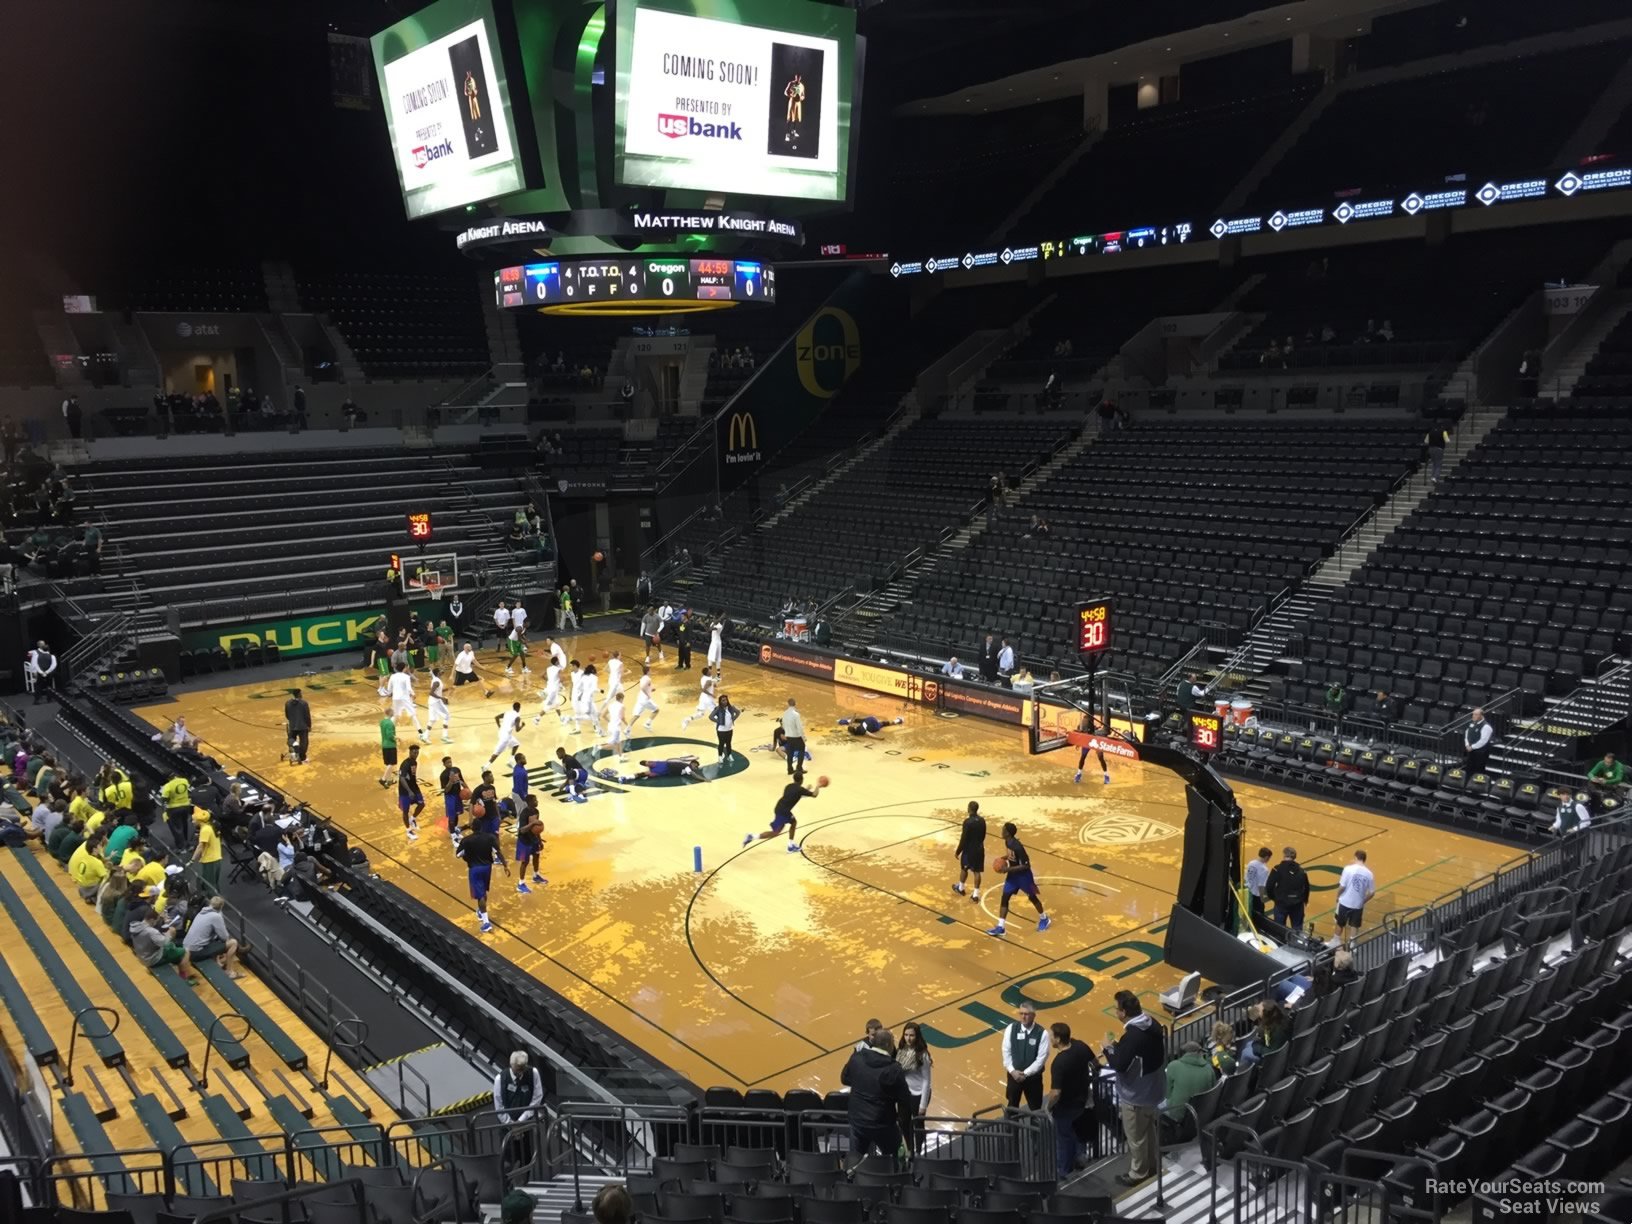 section 109, row k seat view  - matthew knight arena